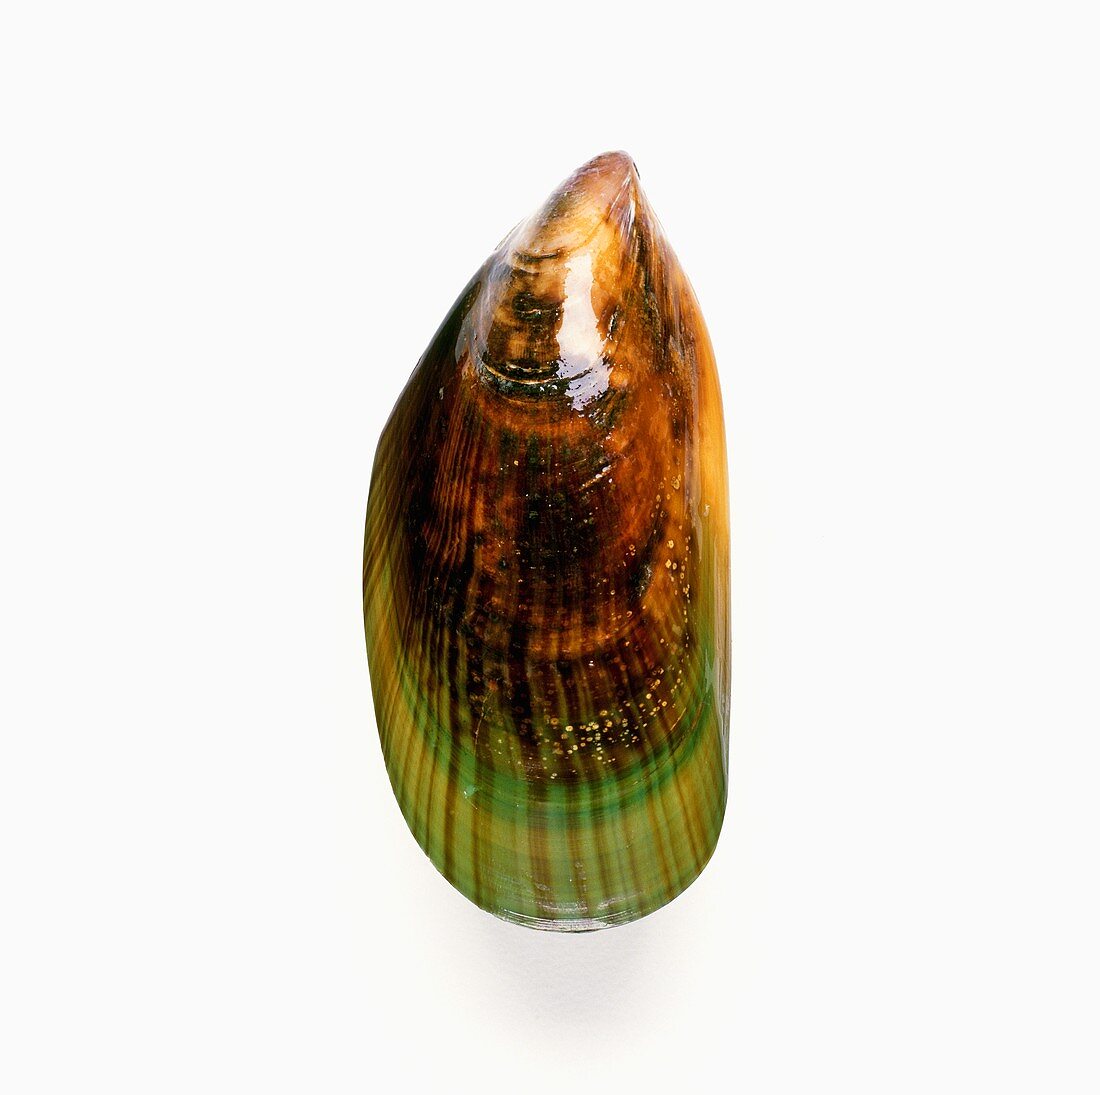 New Zealand Green Mussel on White